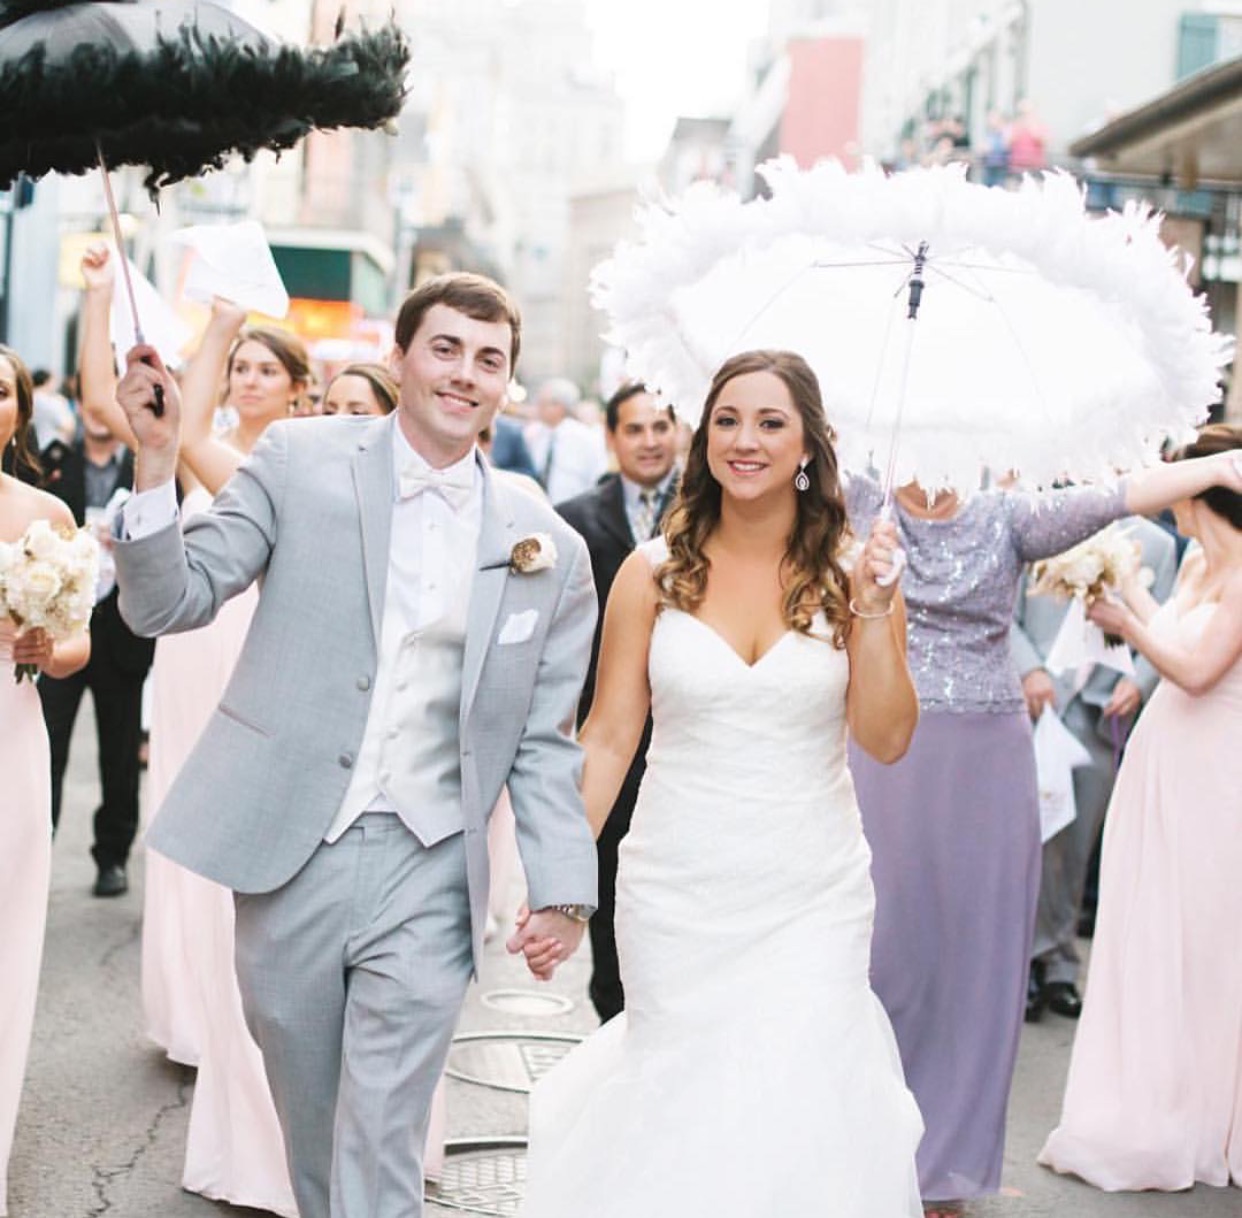 New Orleans wedding second line